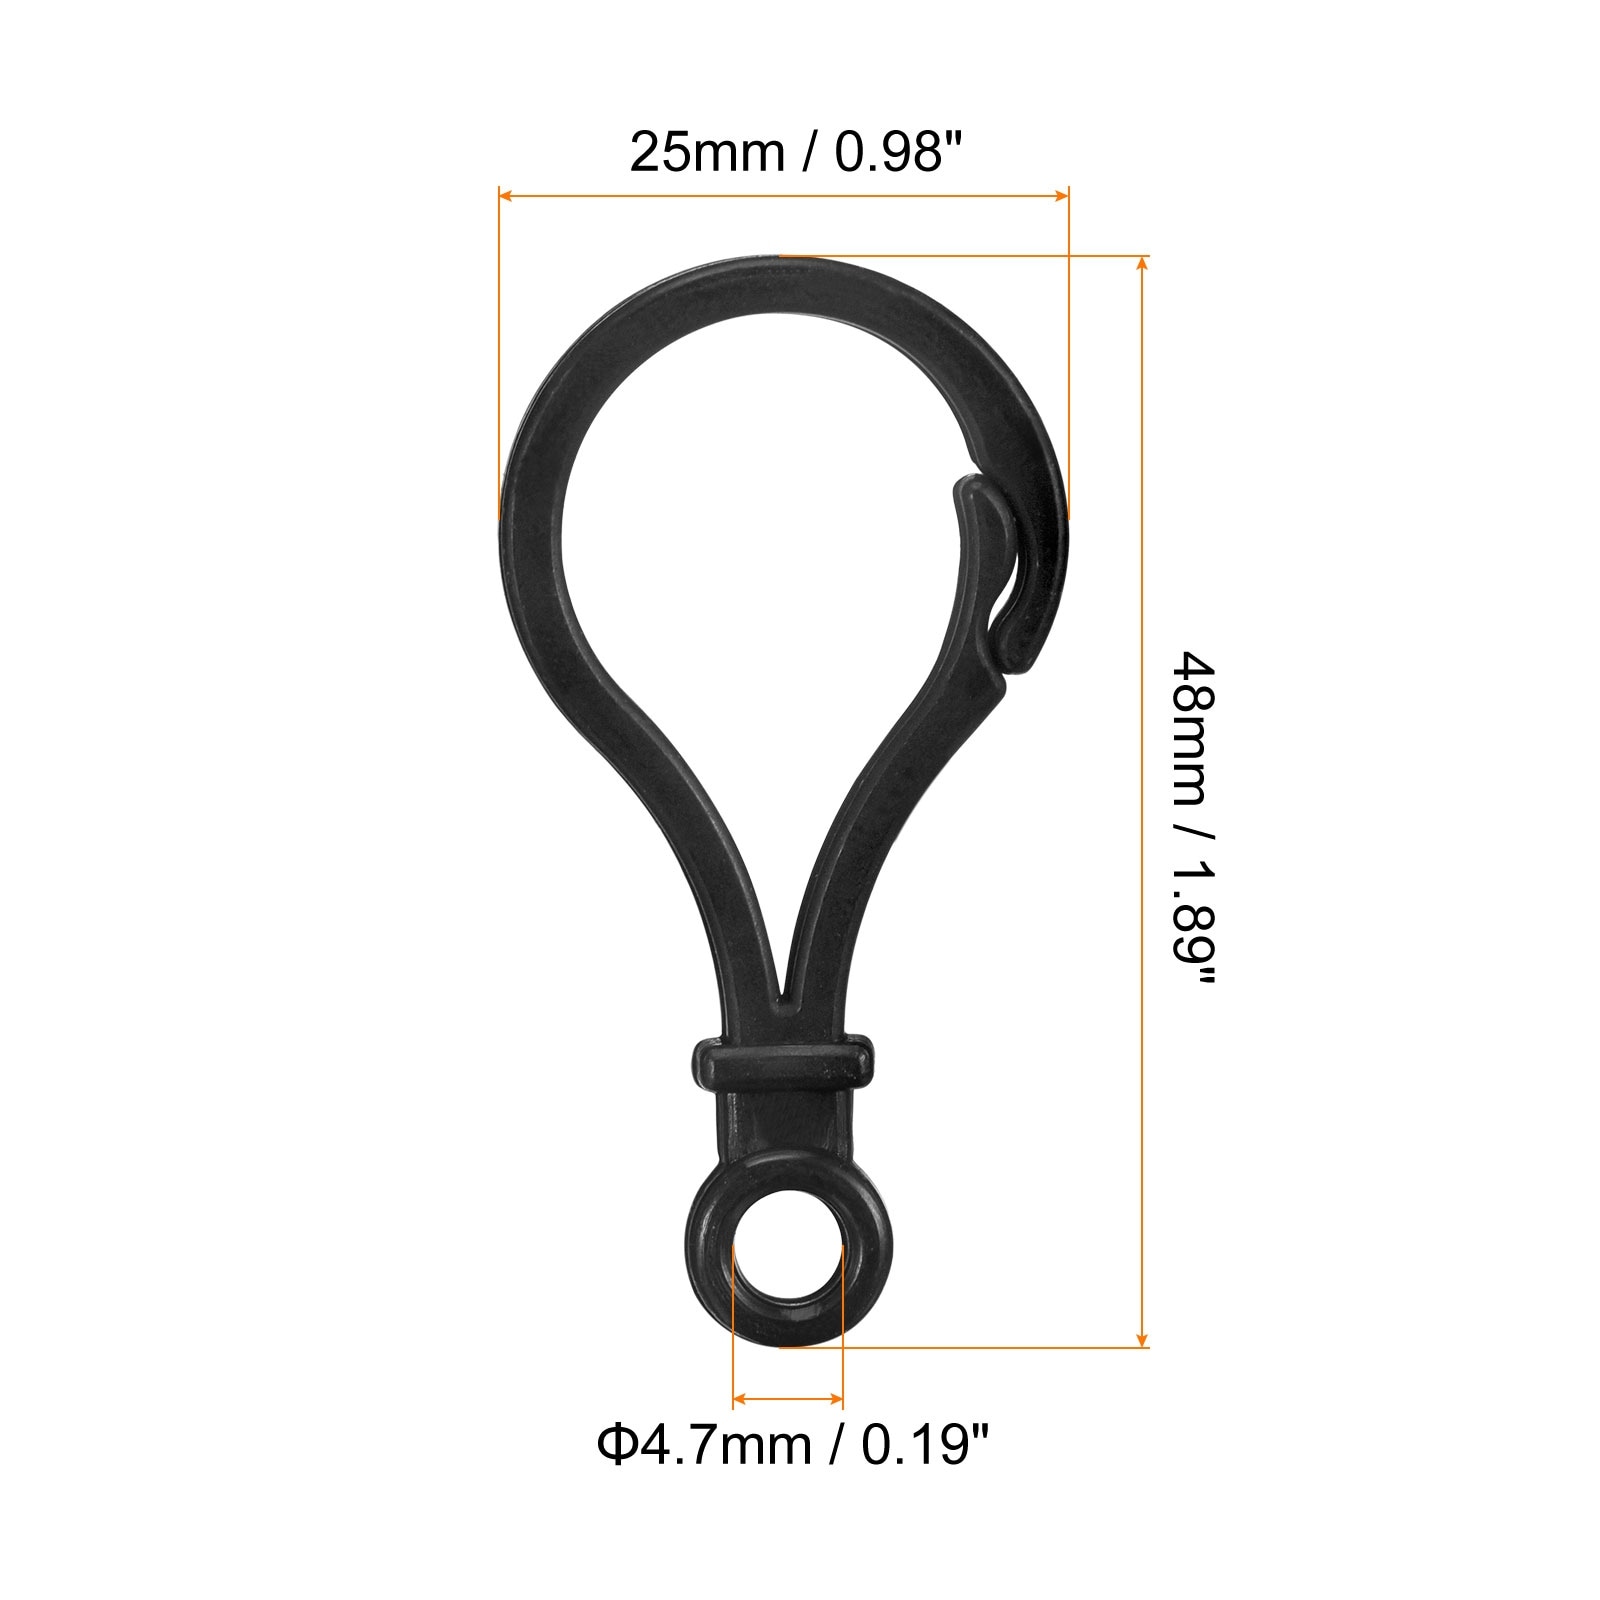 https://ak1.ostkcdn.com/images/products/is/images/direct/223a17fa2f1ce8147c6a8d8ec0bd1d3a24a3c620/Plastic-Lobster-Clasps%2C-Claw-Snap-Hooks-for-Keychains-DIY-Black%2C-100Pcs.jpg